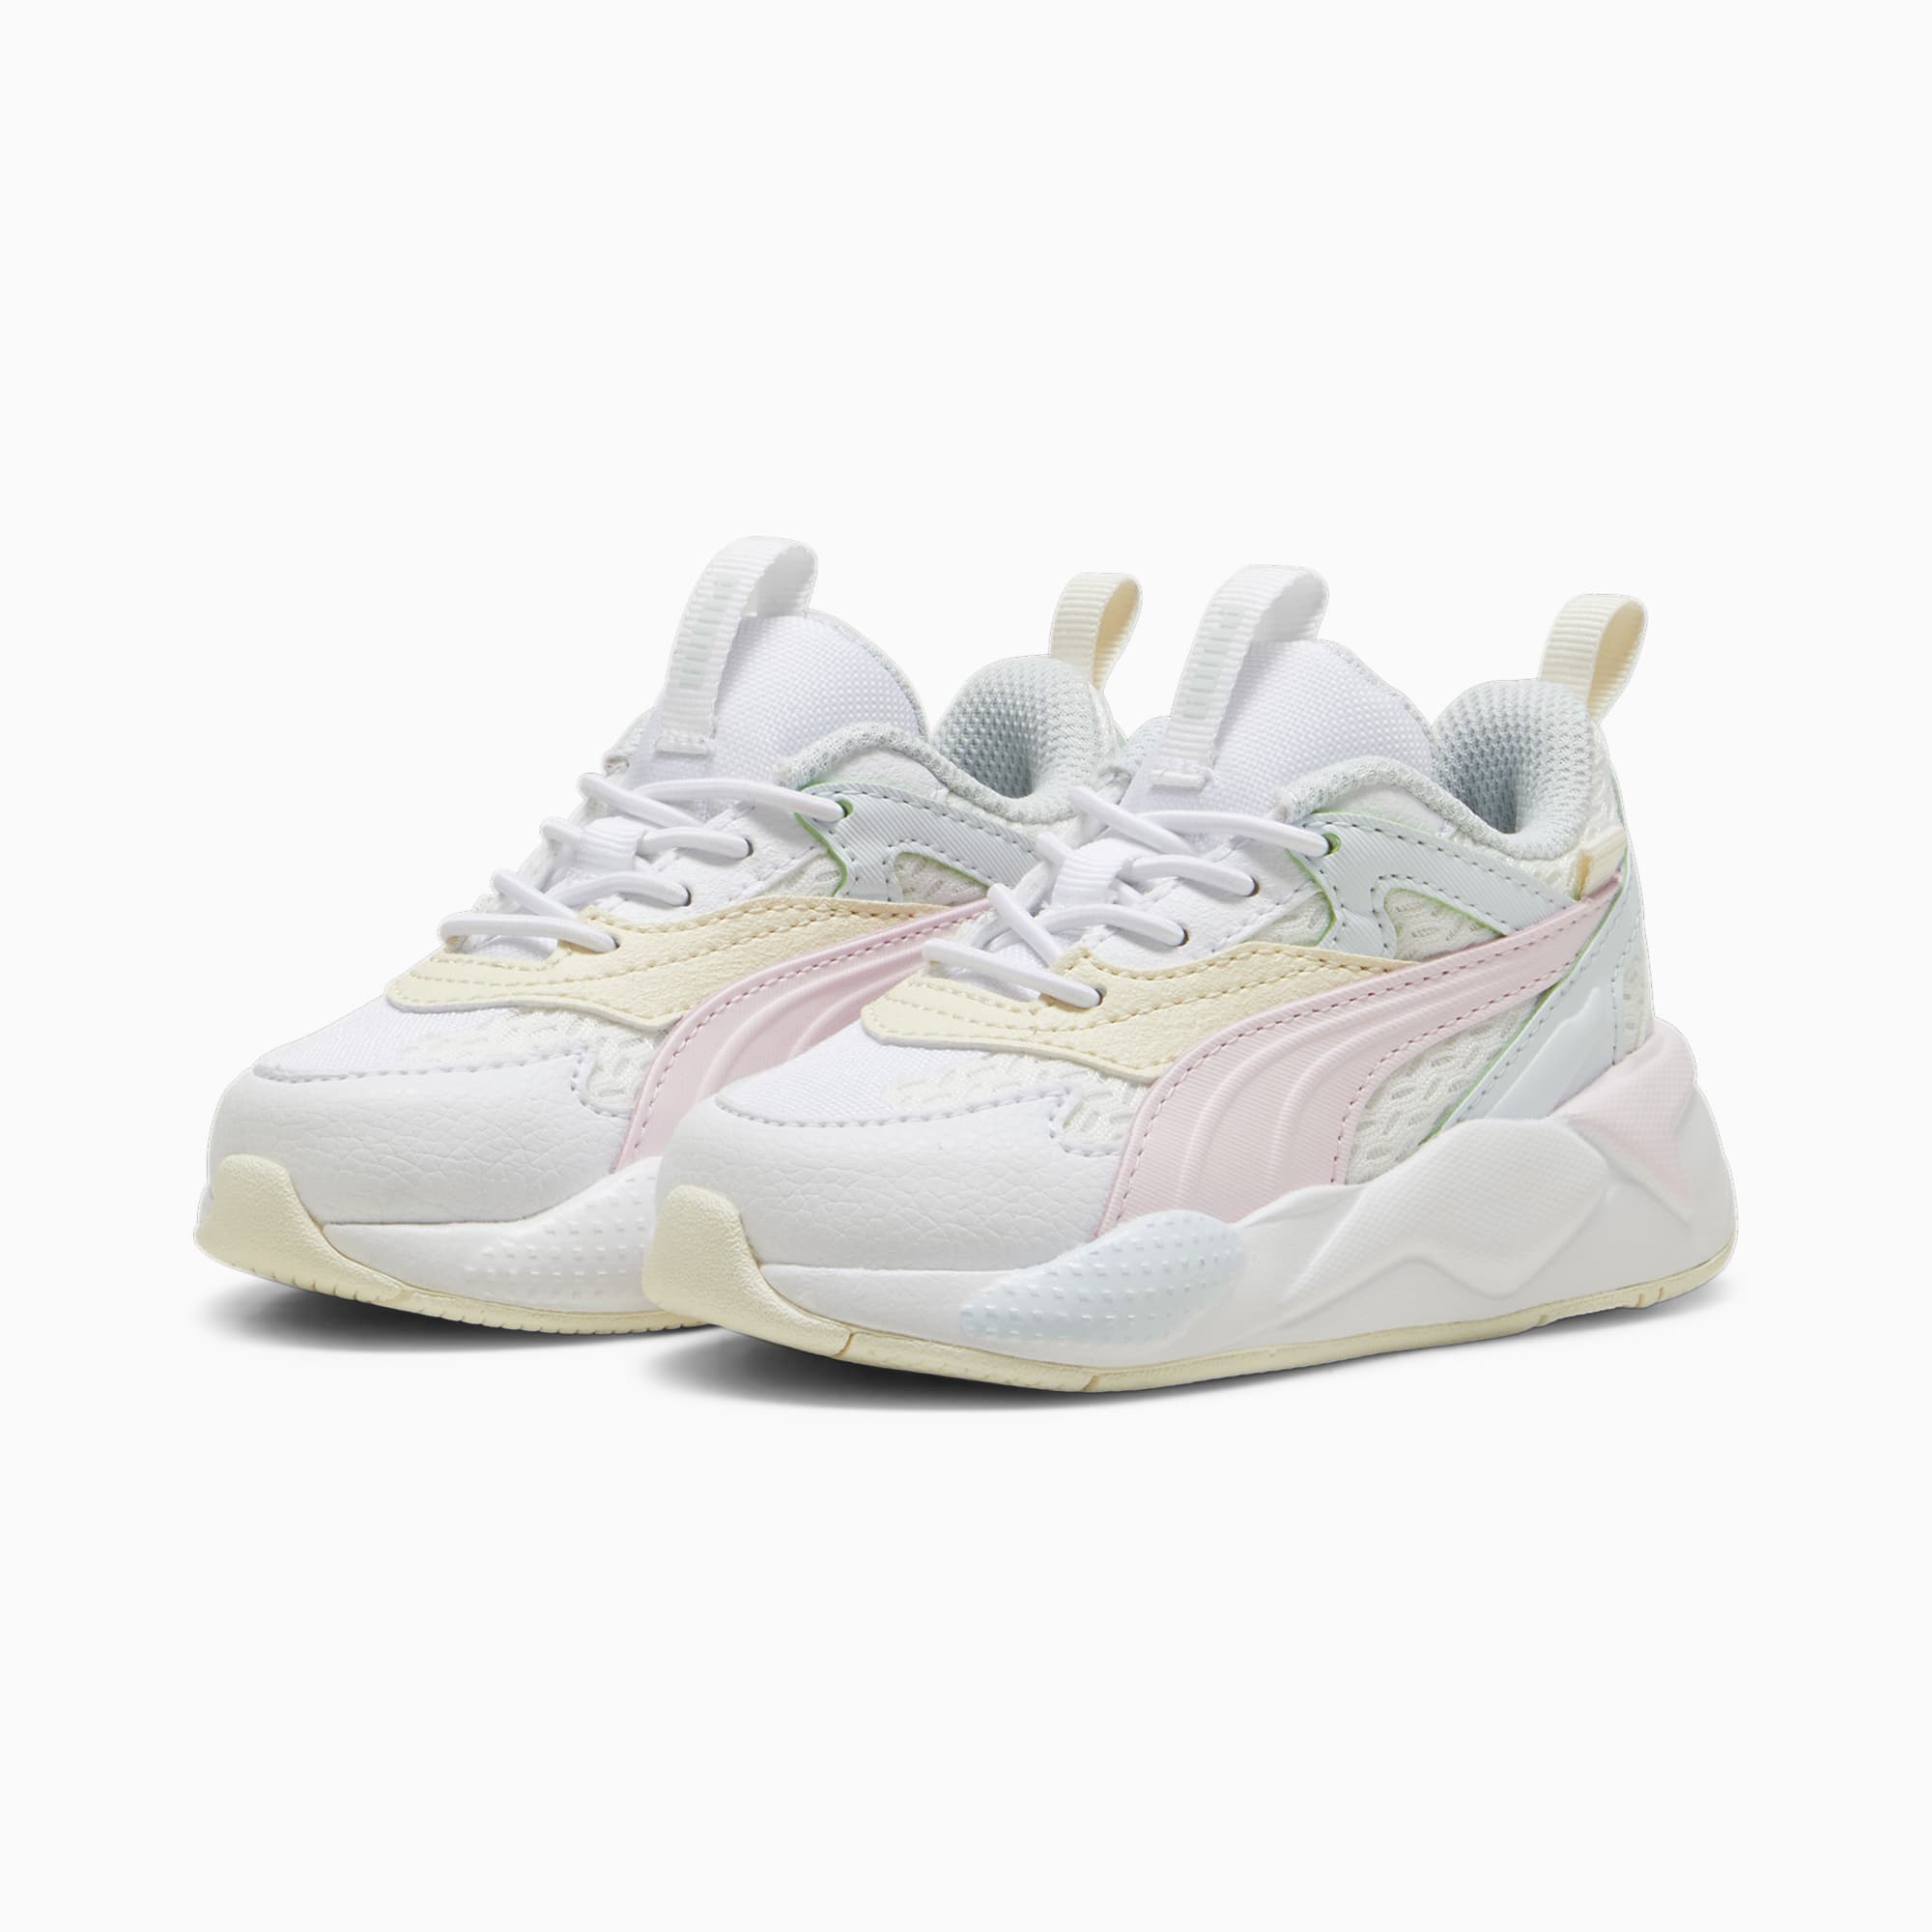 PUMA Rs-X Efekt Toddlers' Sneakers, White/Whisp Of Pink, Size 19, Shoes